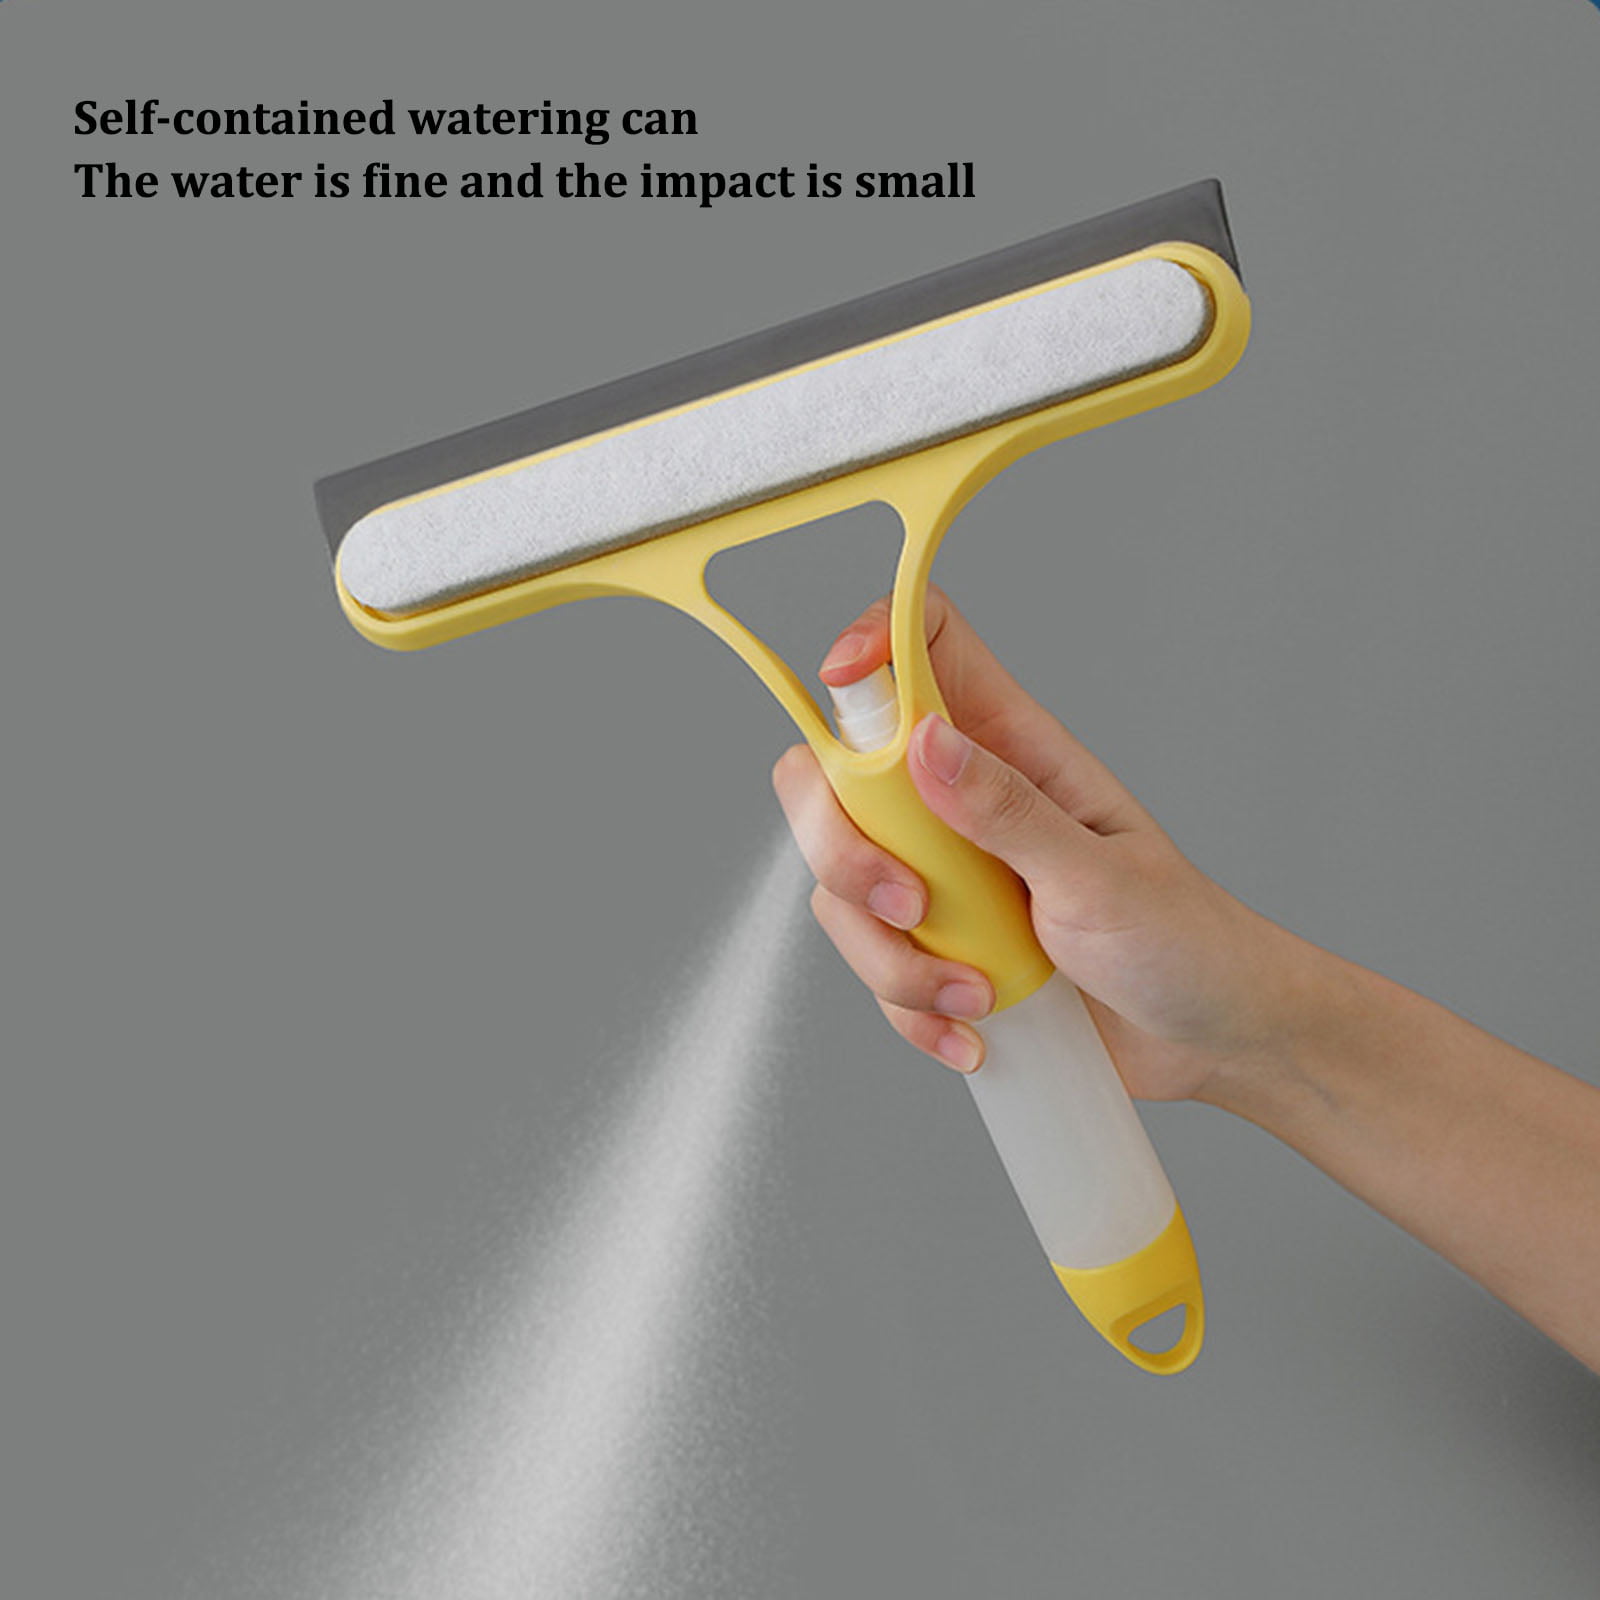 Eyliden Window Scrubber with Patent Water Collection System, Soft Silicone  Squeegee & Sponge Window Scrubber and Sewage Catcher Bottle - 3 in 1 Window